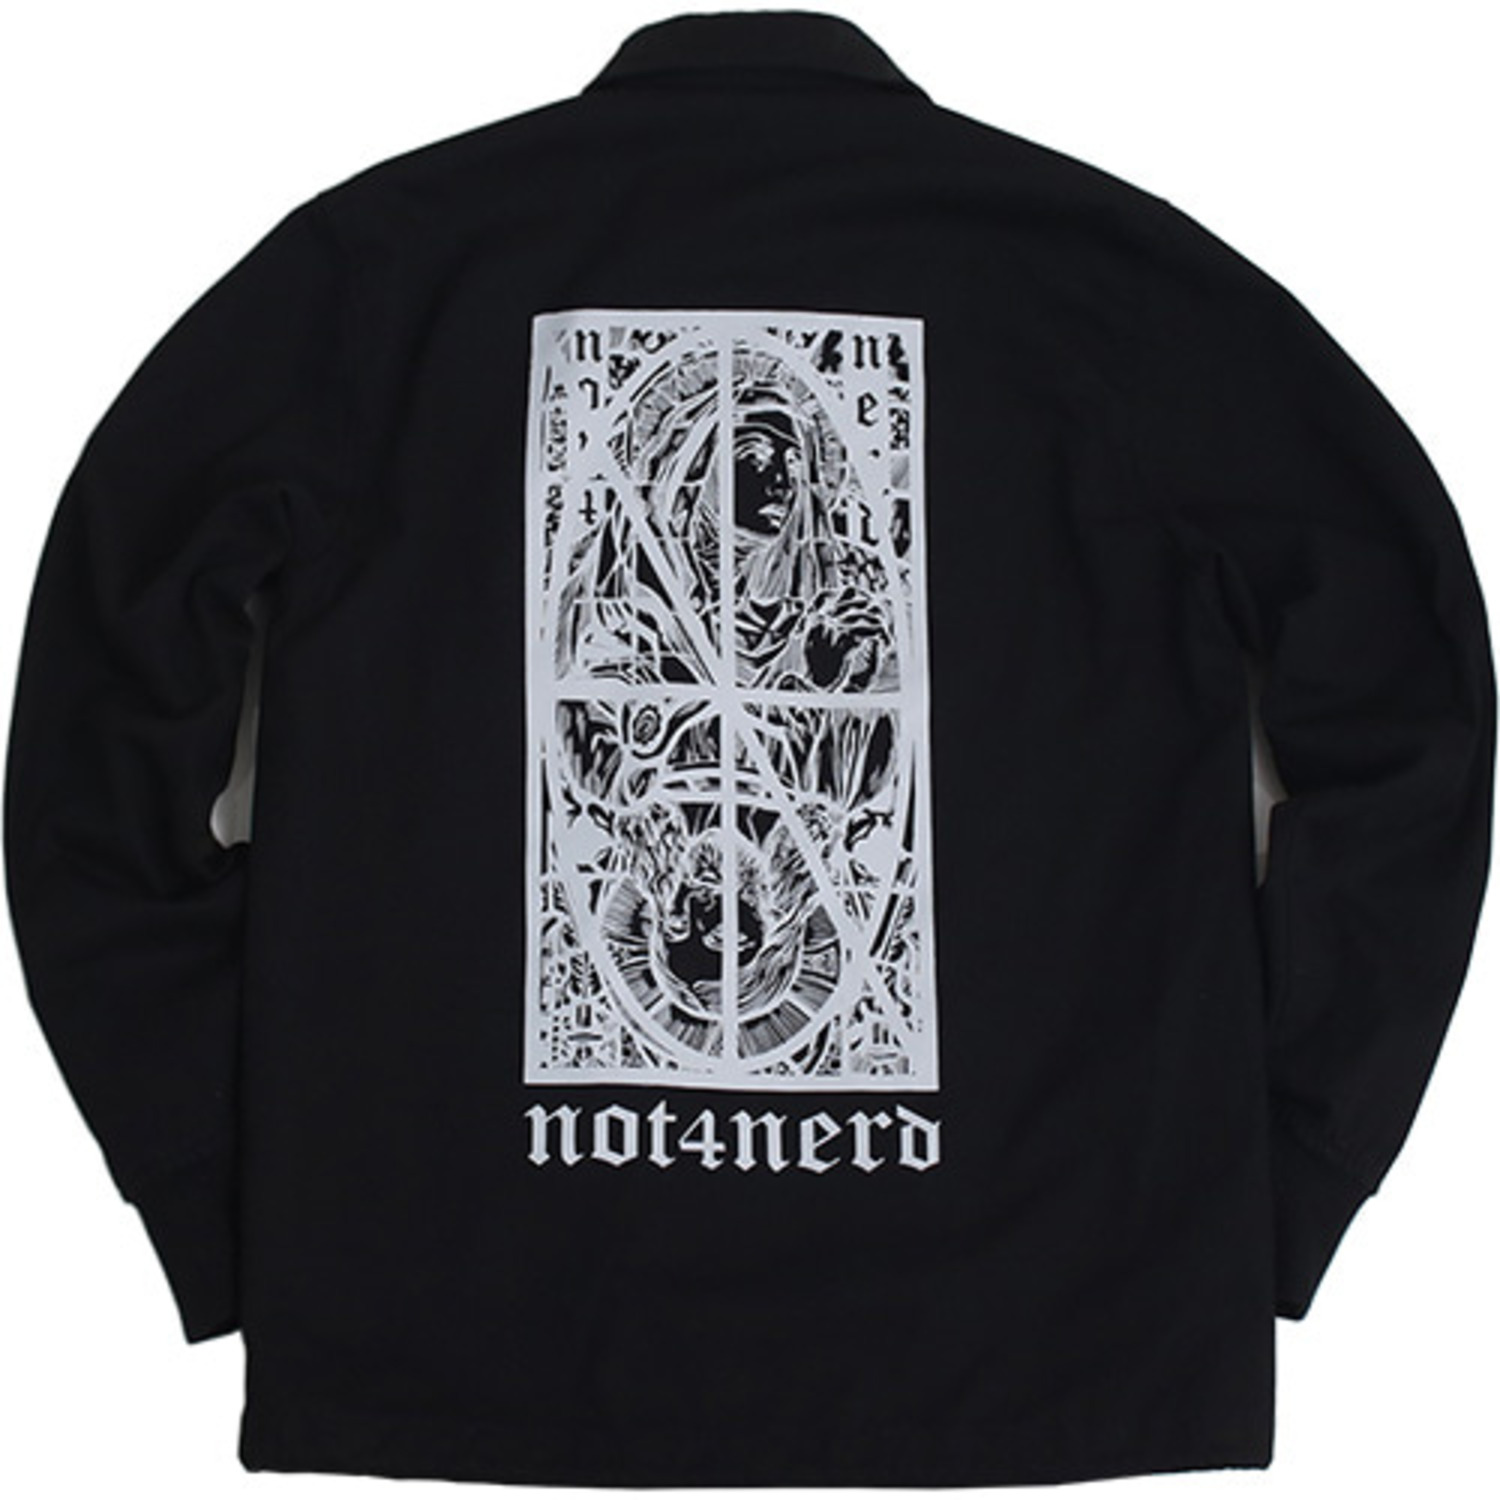 Two Faces Twill Coach Jacket [Black],NOT4NERD